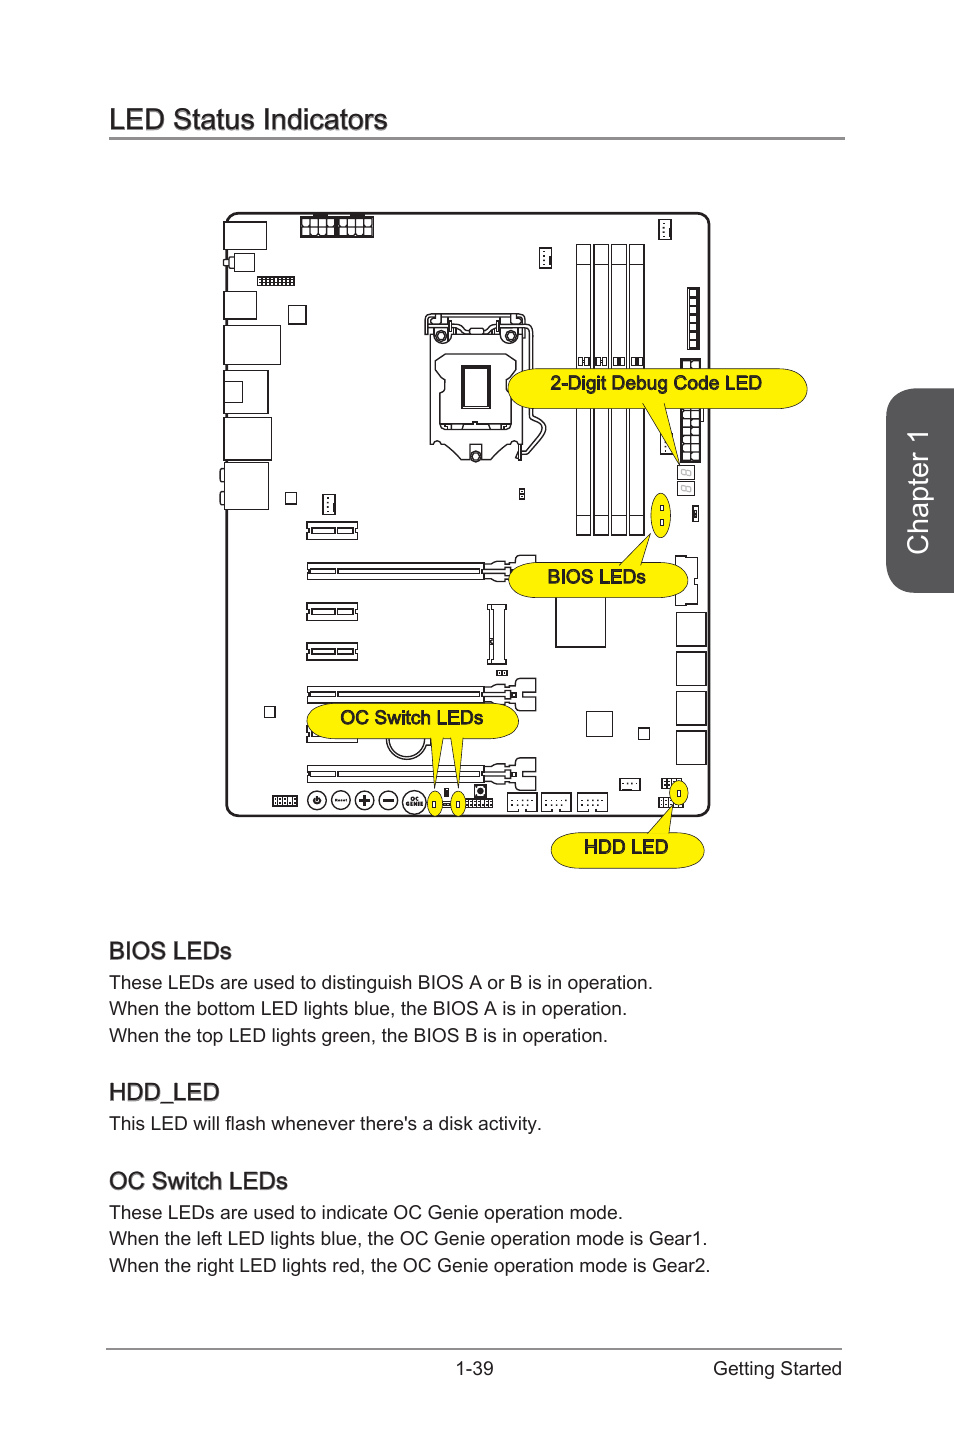 Led status indicators, Bios leds, Hdd_led | MSI Z87 MPOWER SP User Manual |  Page 53 / 118